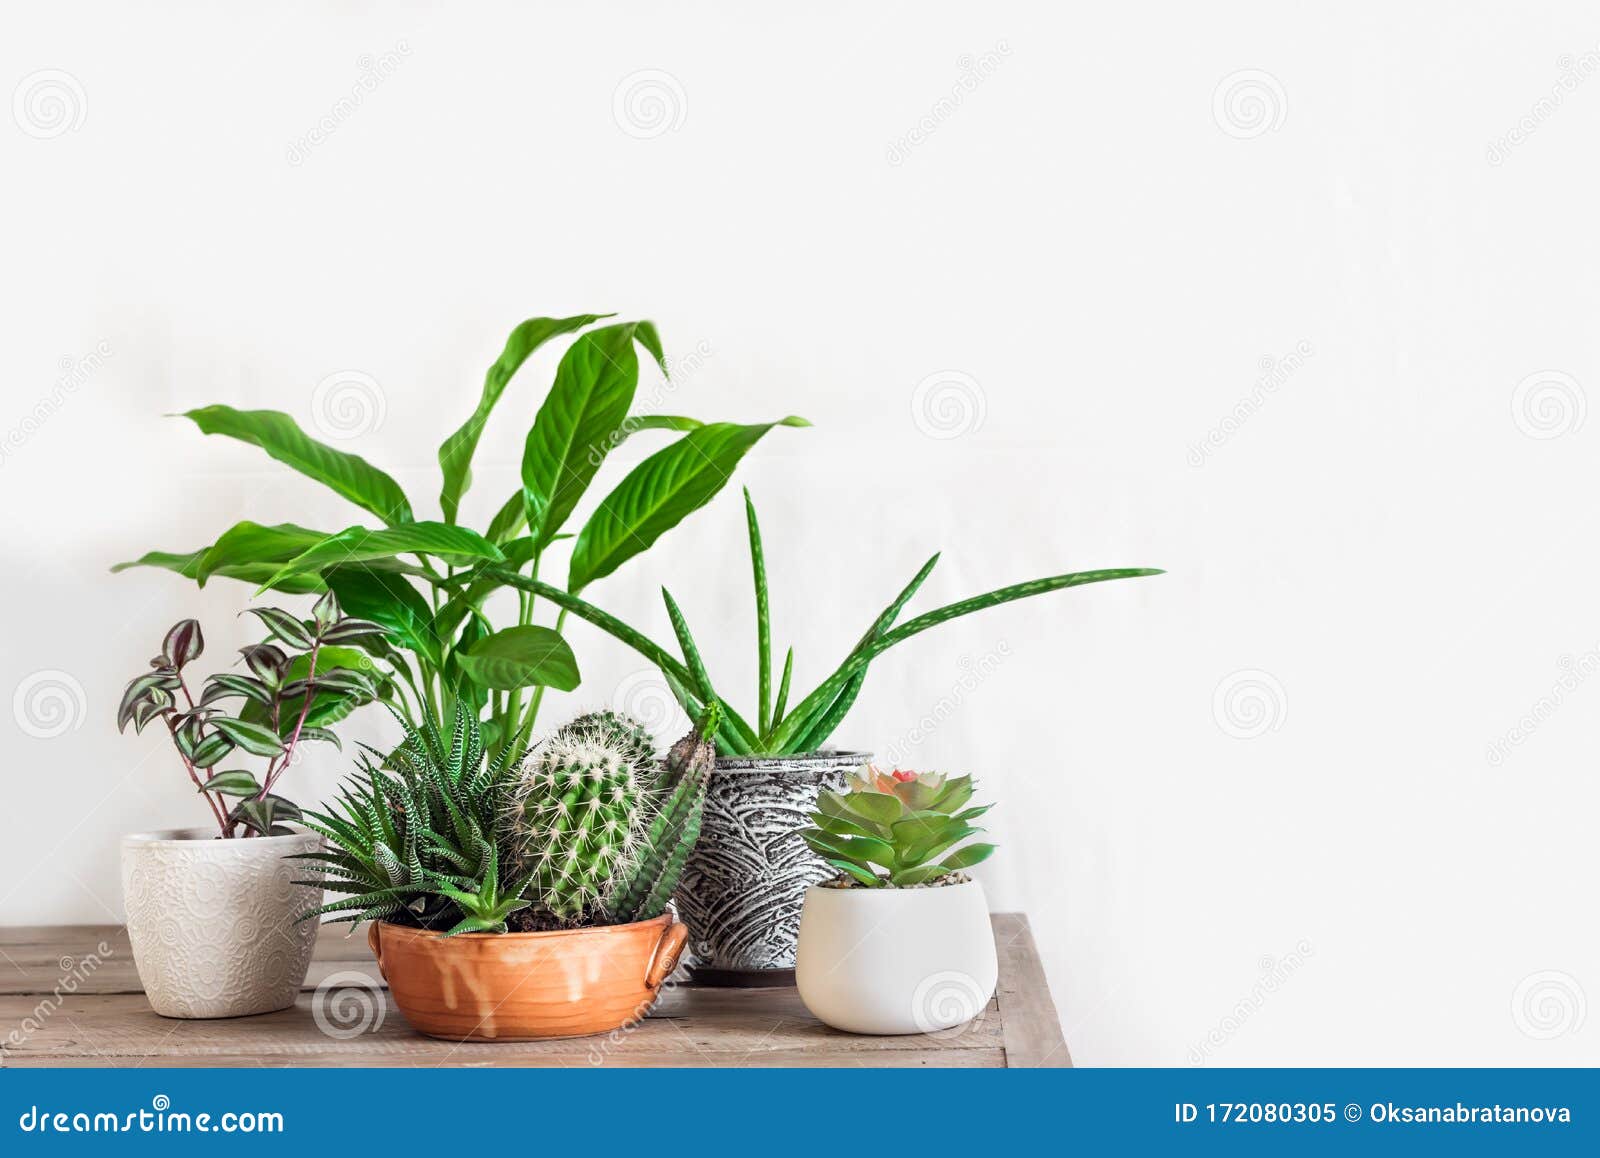 home potted plants